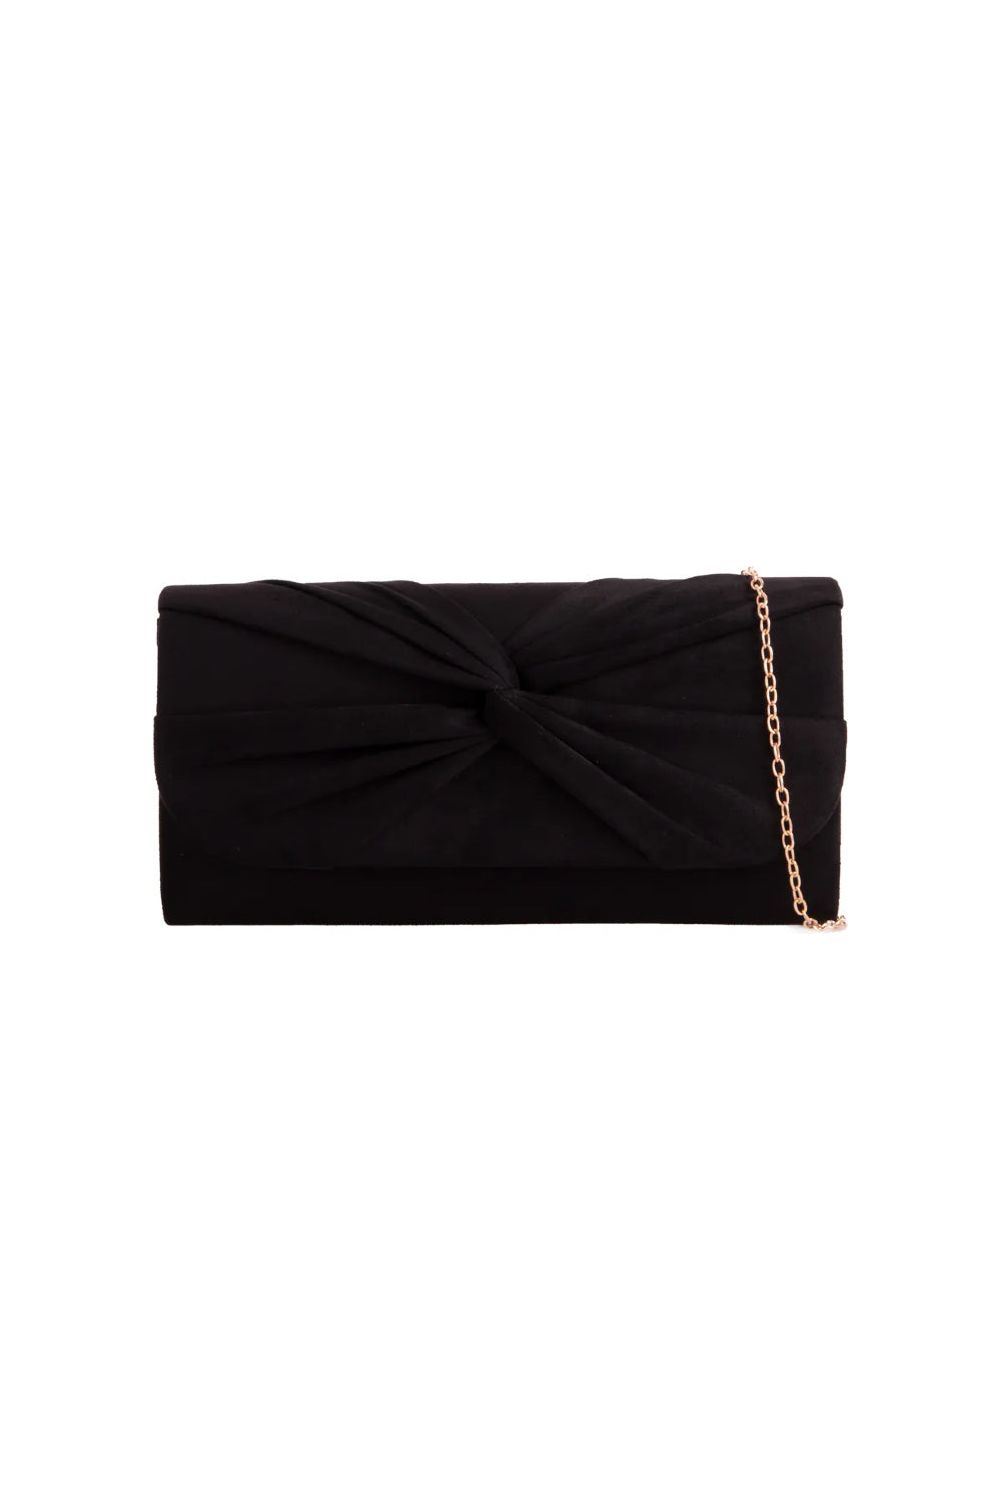 Black Suede Clutch Bag With Knot Detail ALJ2724